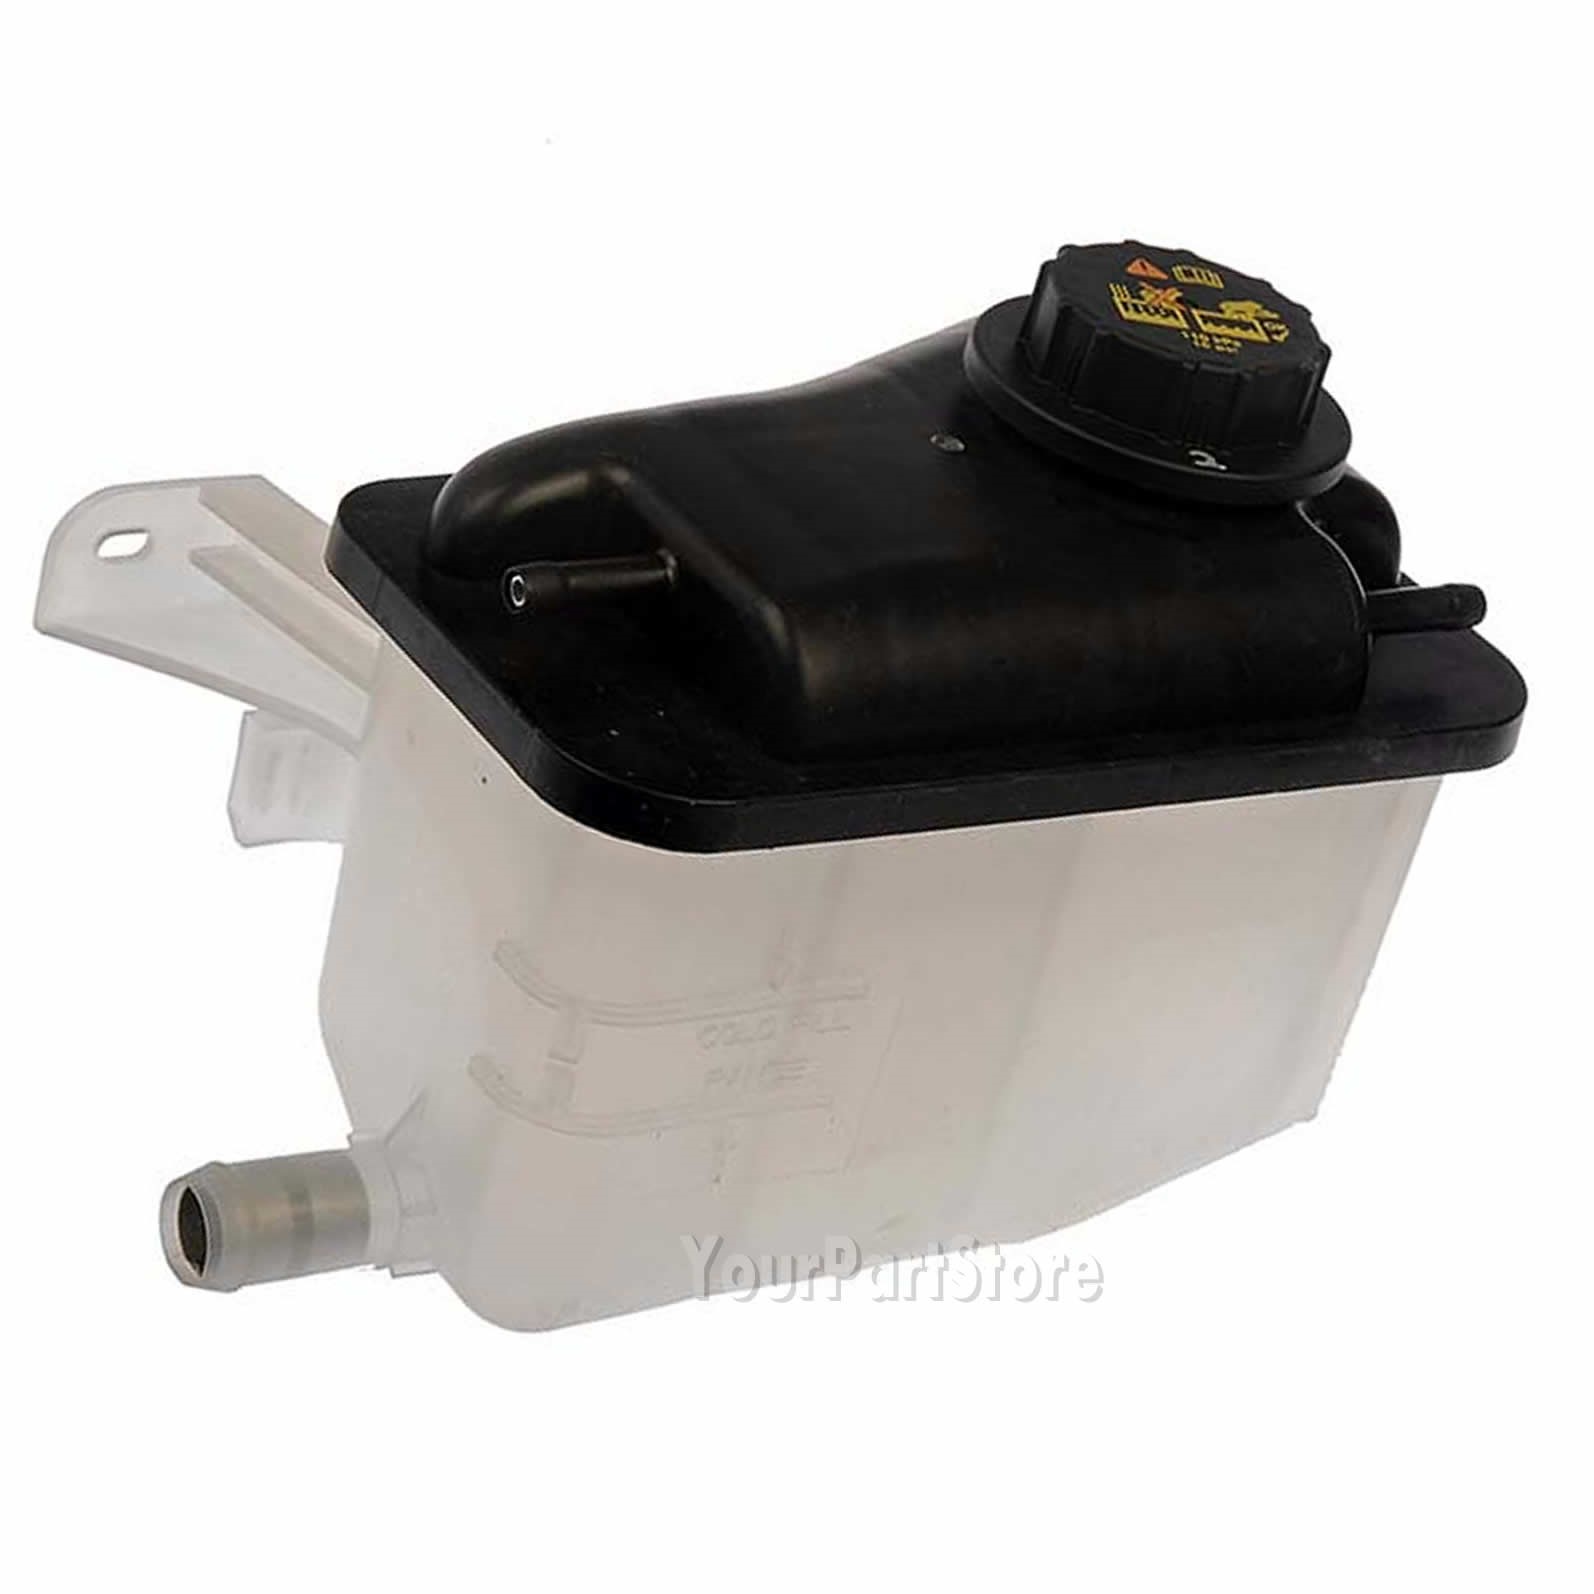 Ford taurus coolant reservoir replacement #5